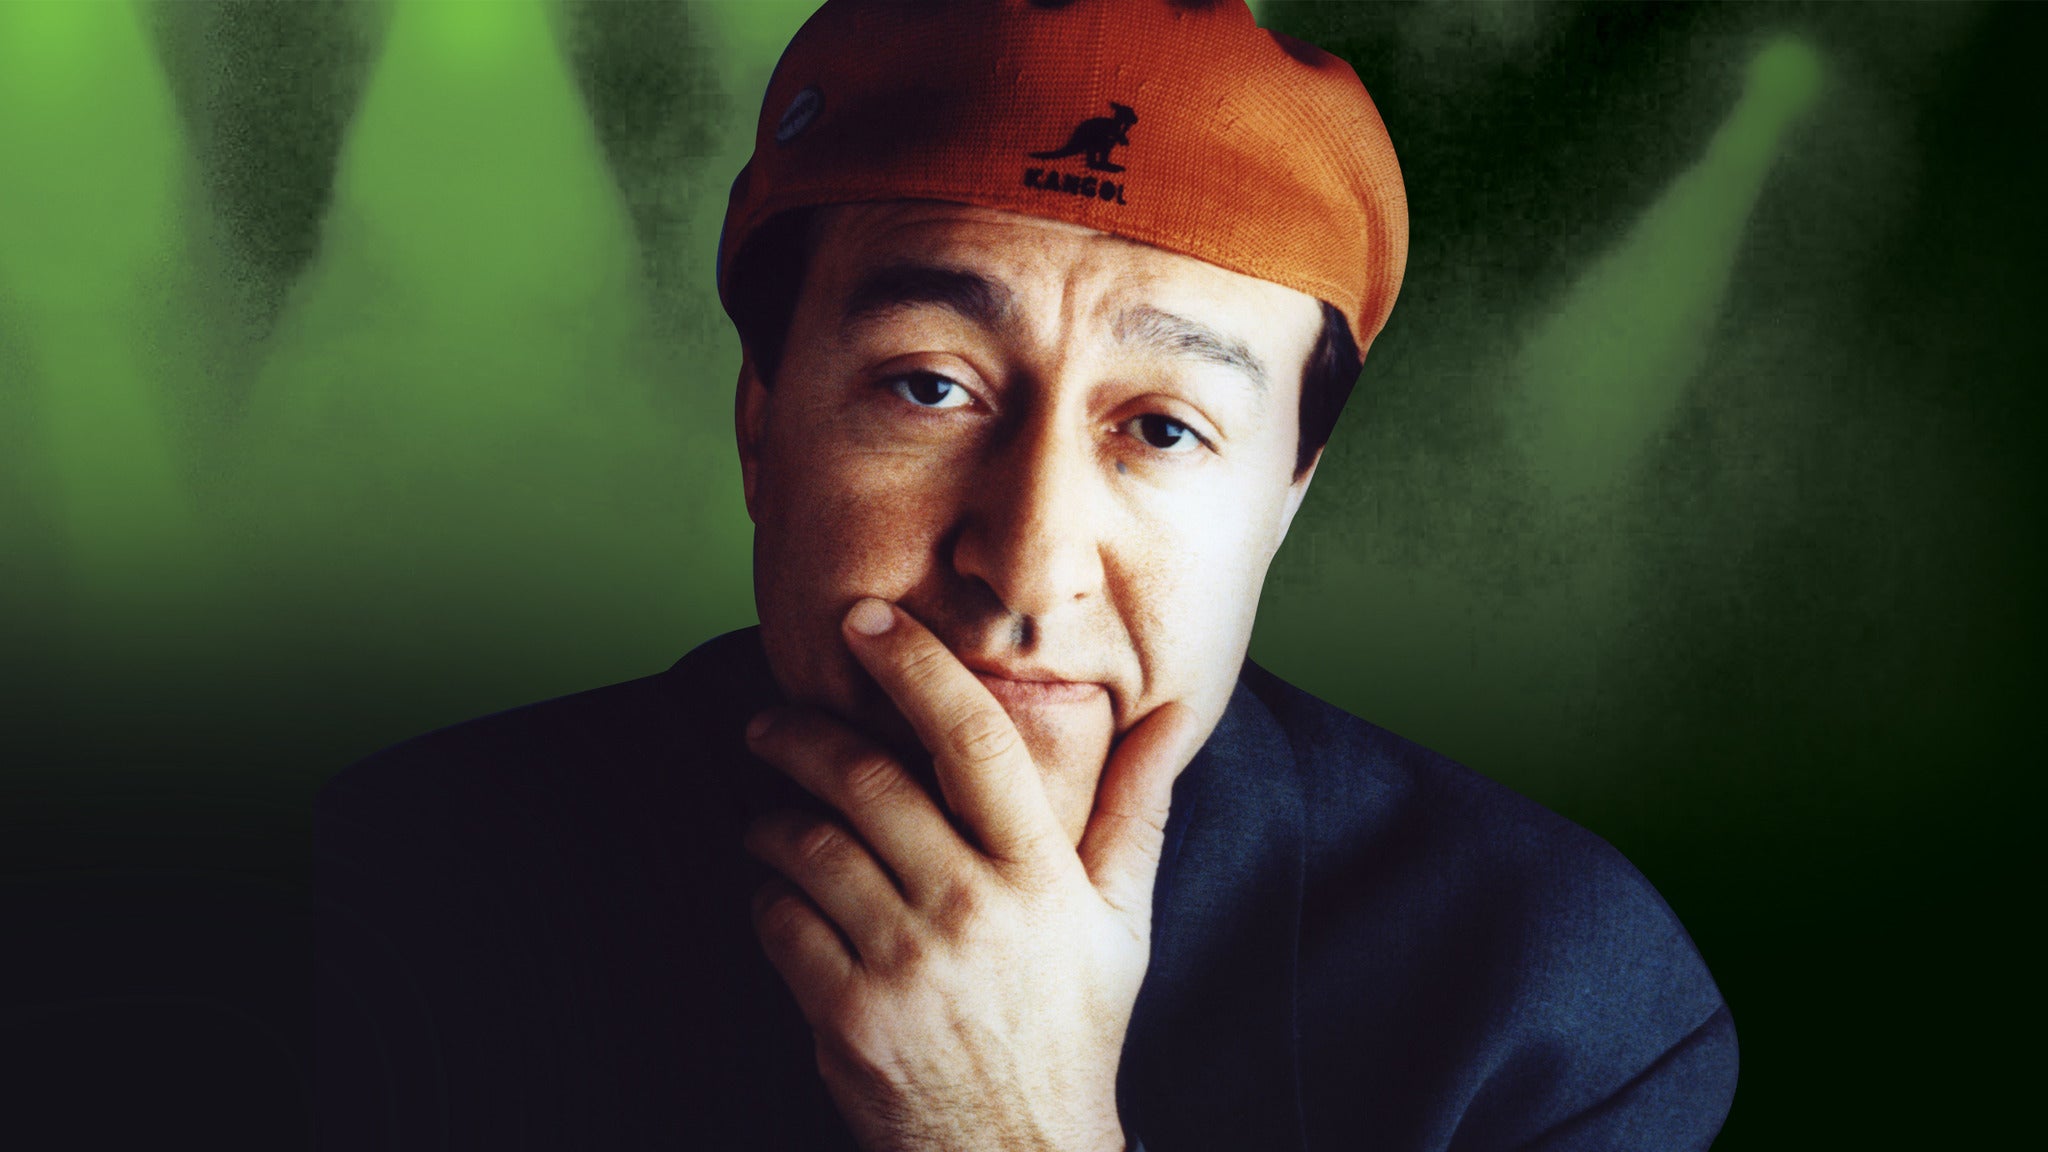 Tonight at the Improv ft. Dom Irrera and more TBA!